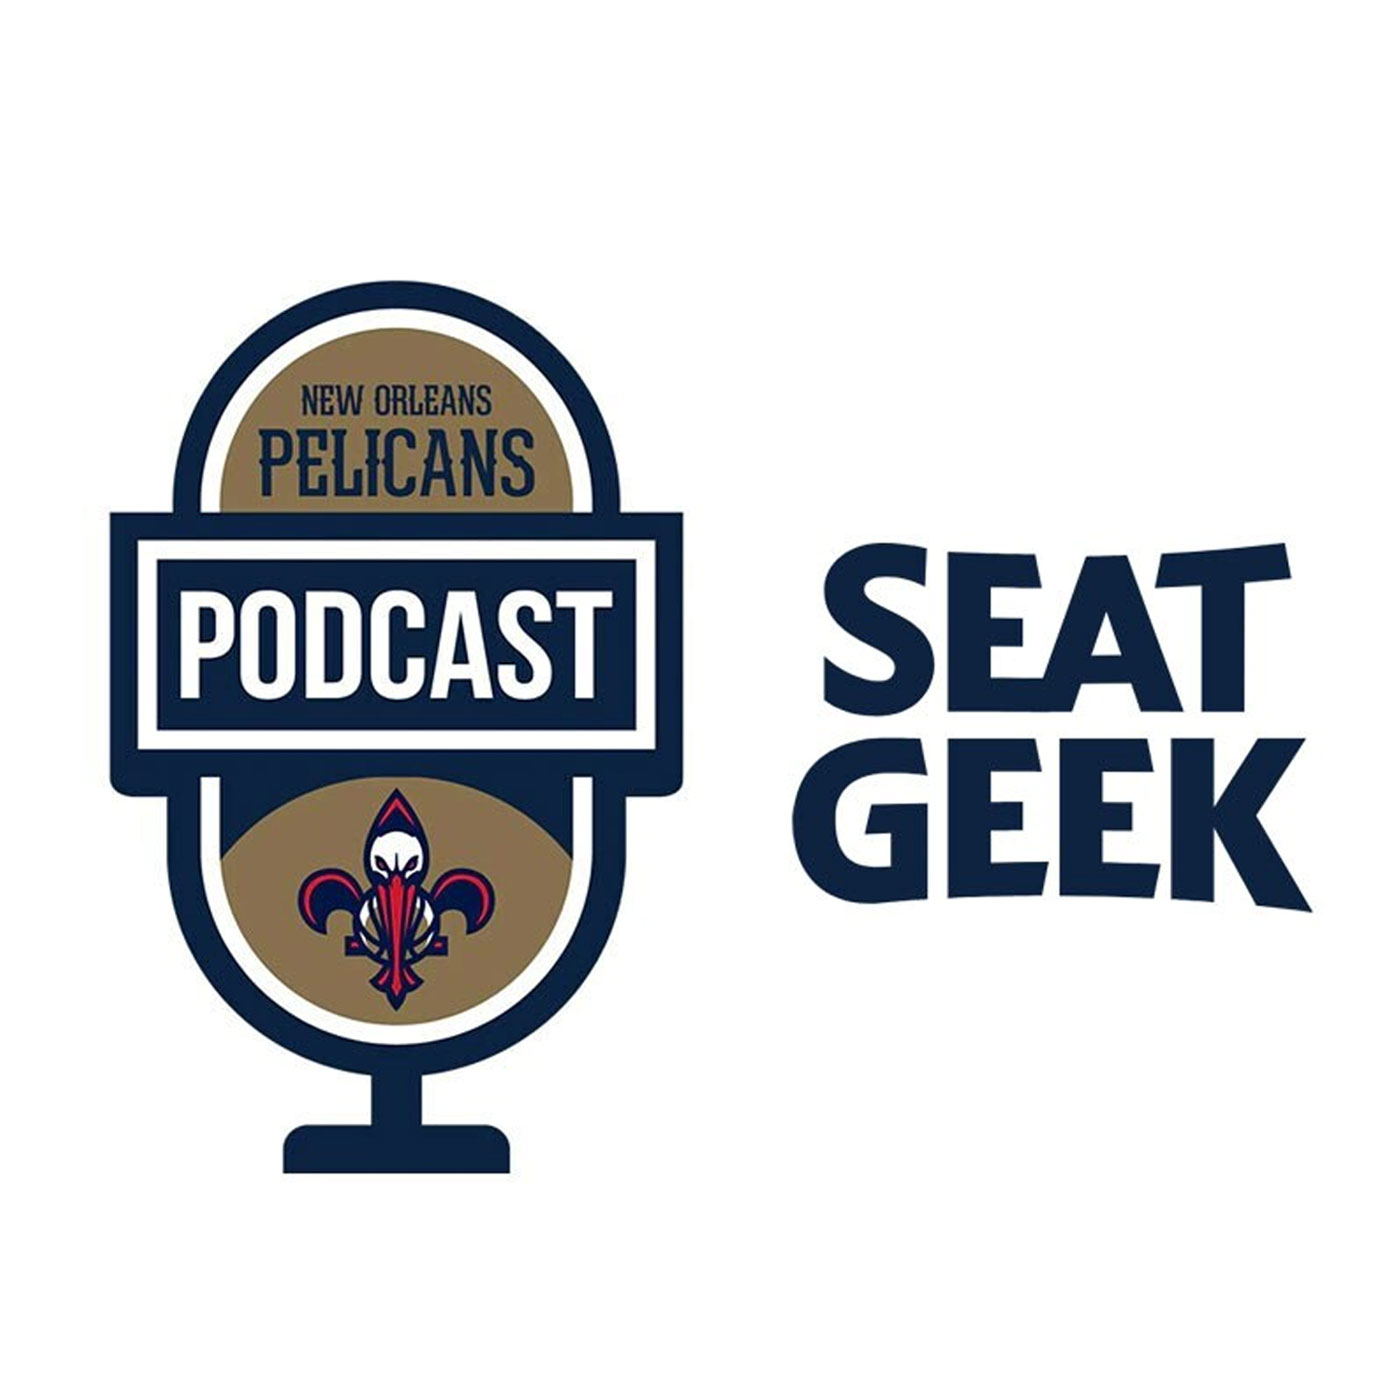 Trey Murphy Player Recap on the New Orleans Pelicans Podcast presented by SeatGeek - May 19, 2022